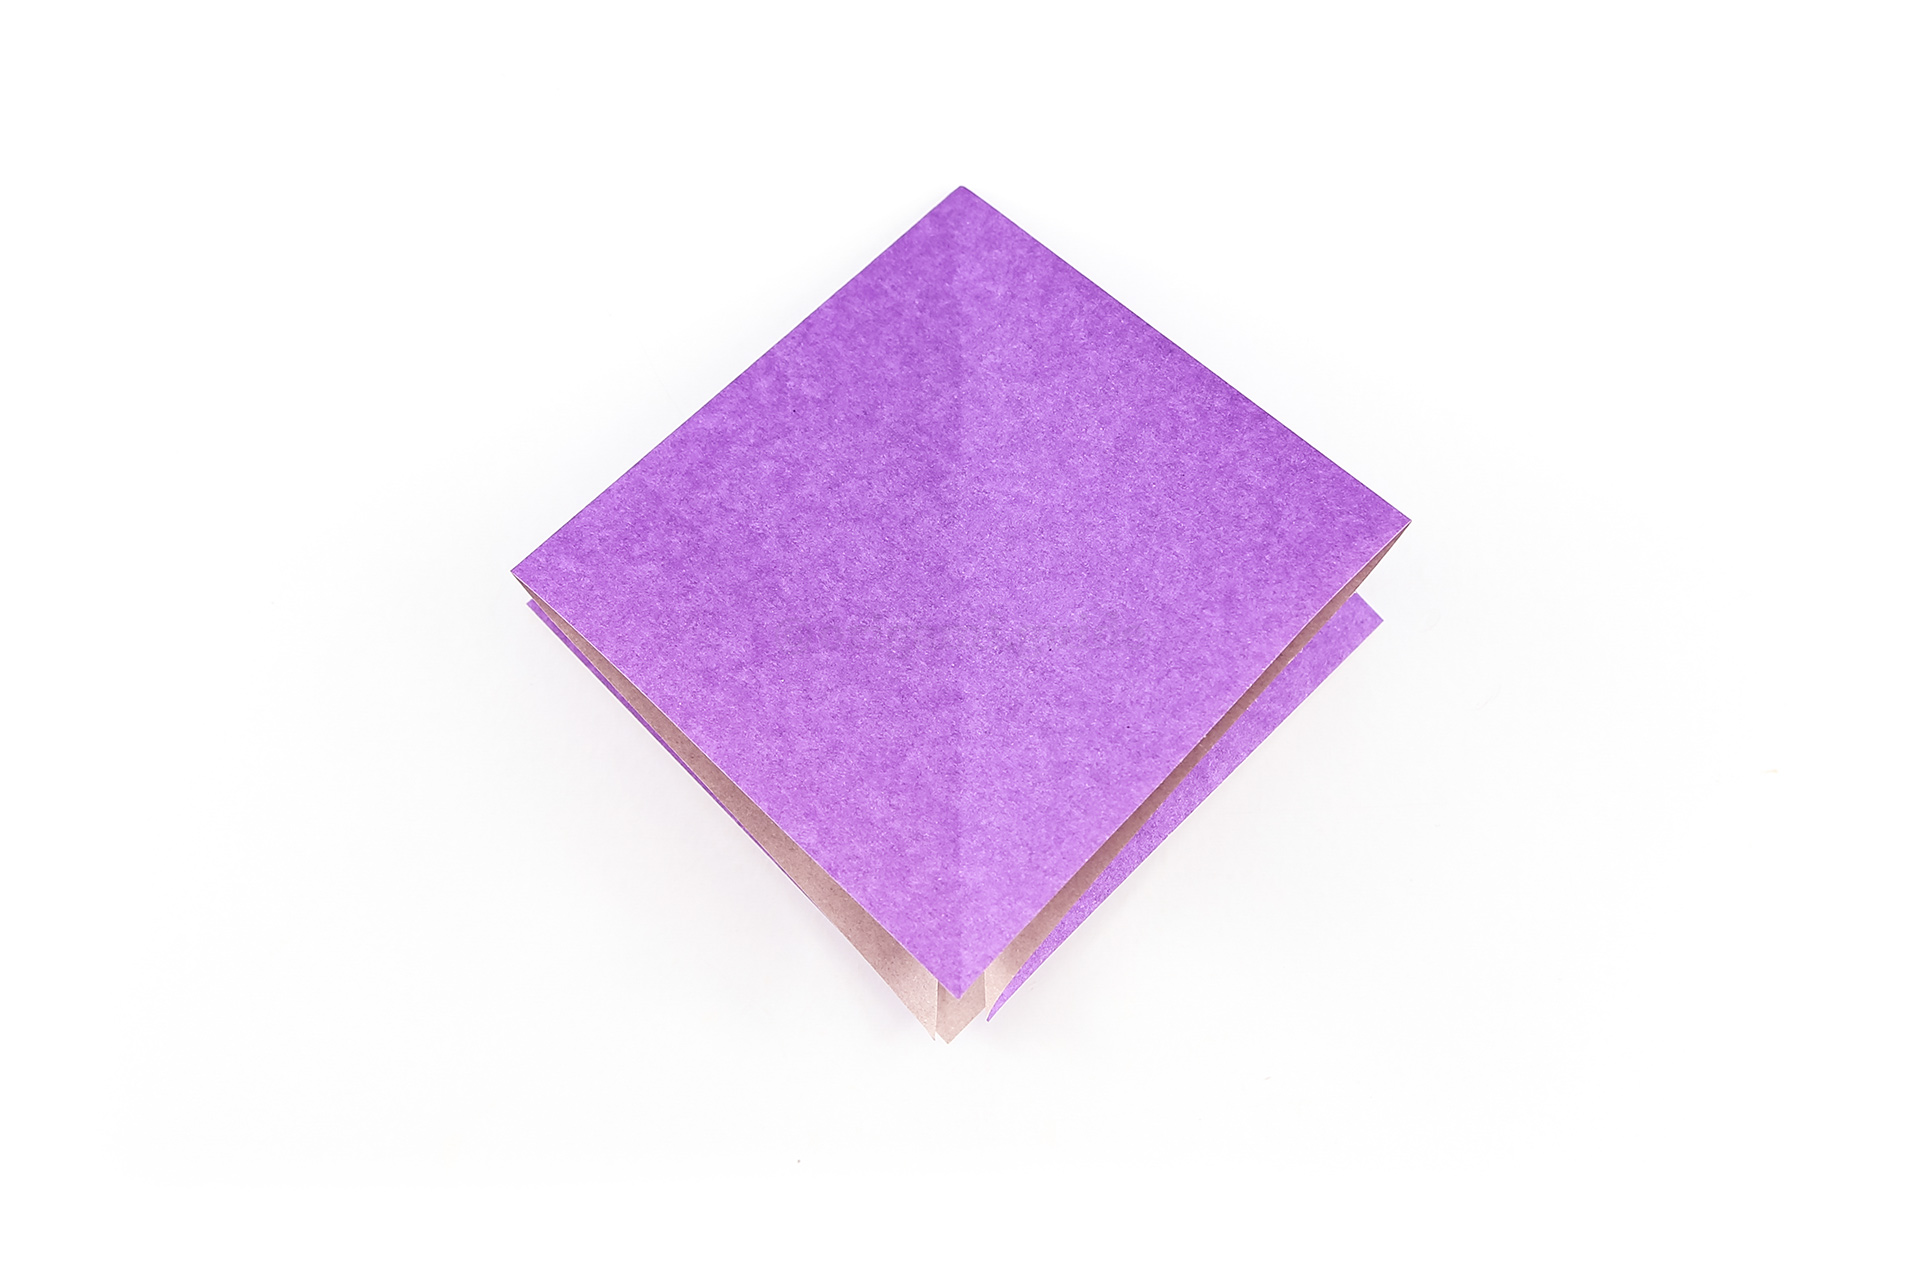 This is the completed origami square base. Please see this page for a slightly easier method.